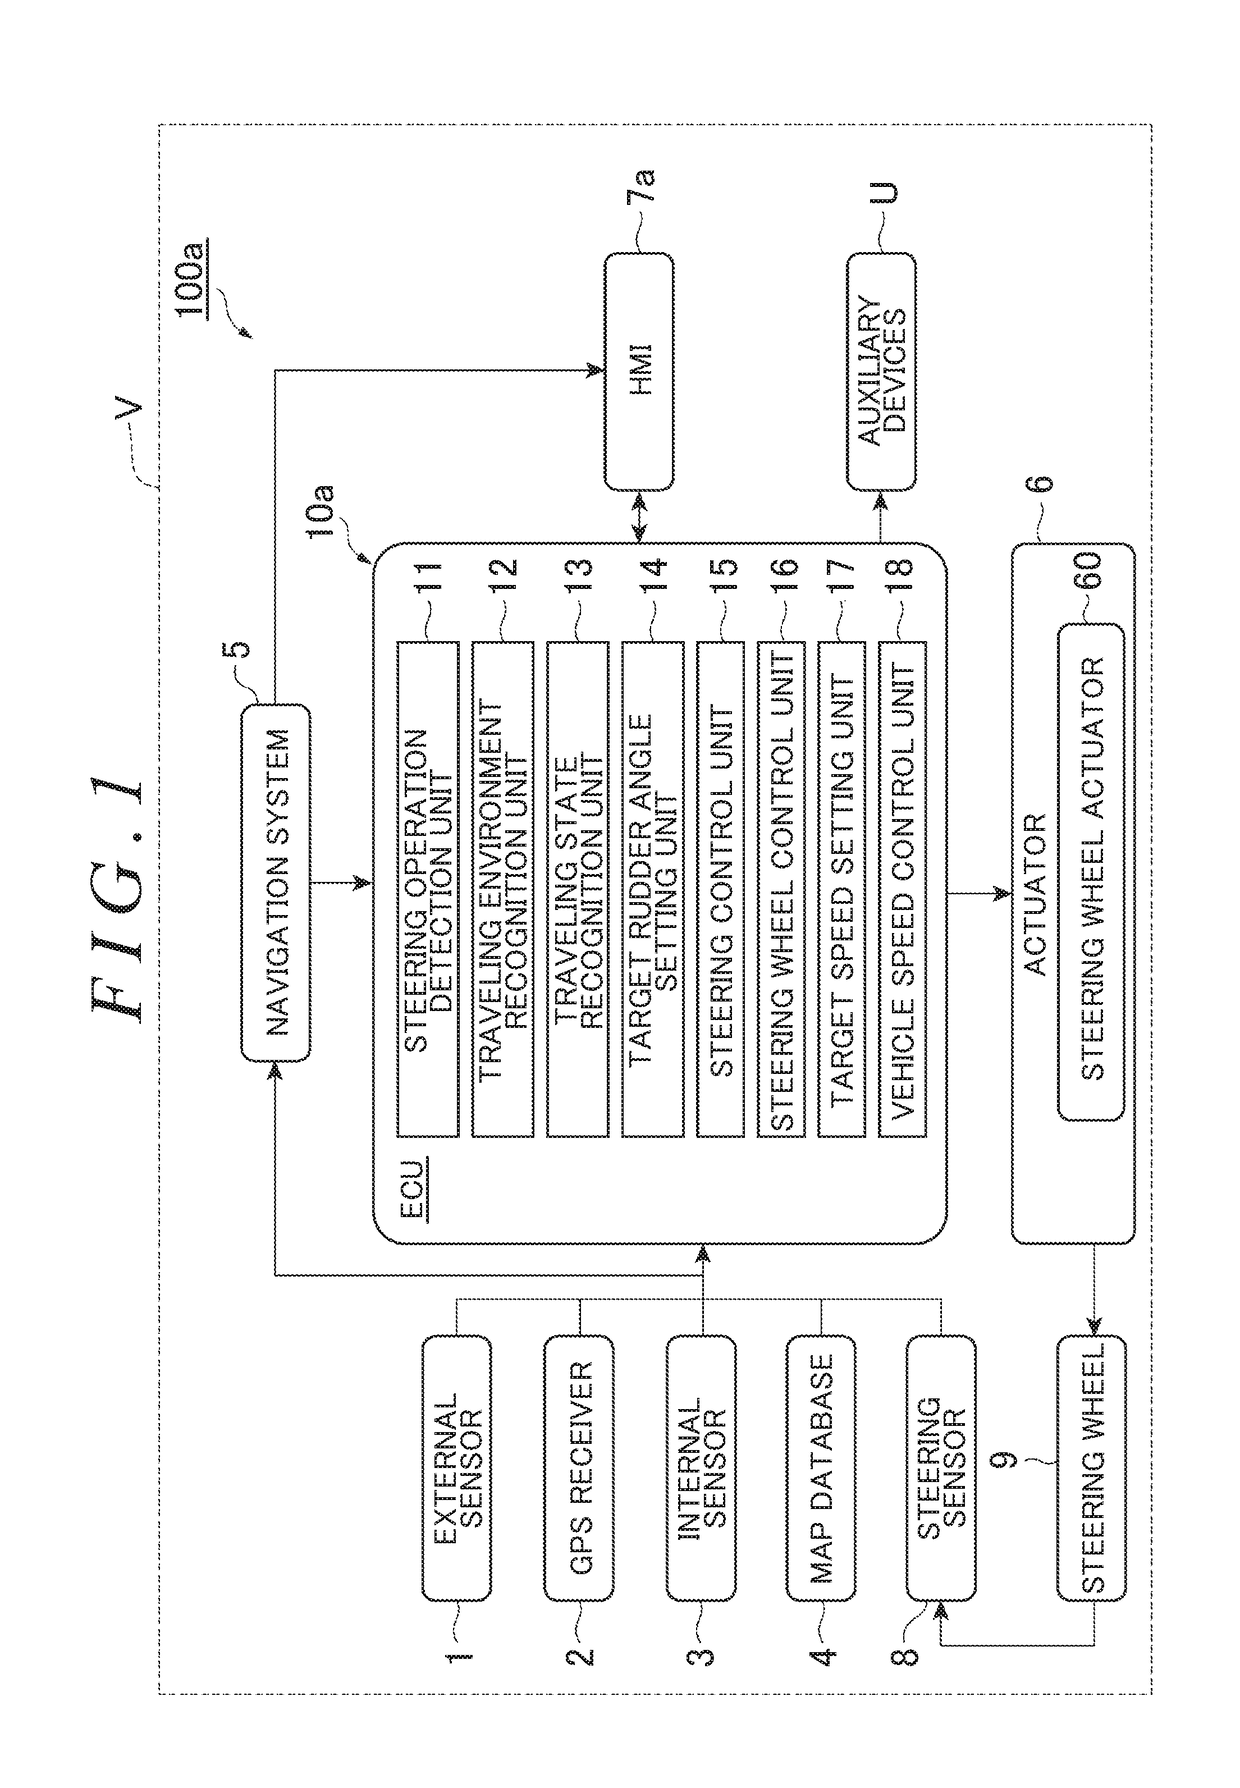 Automated driving apparatus and automated driving system